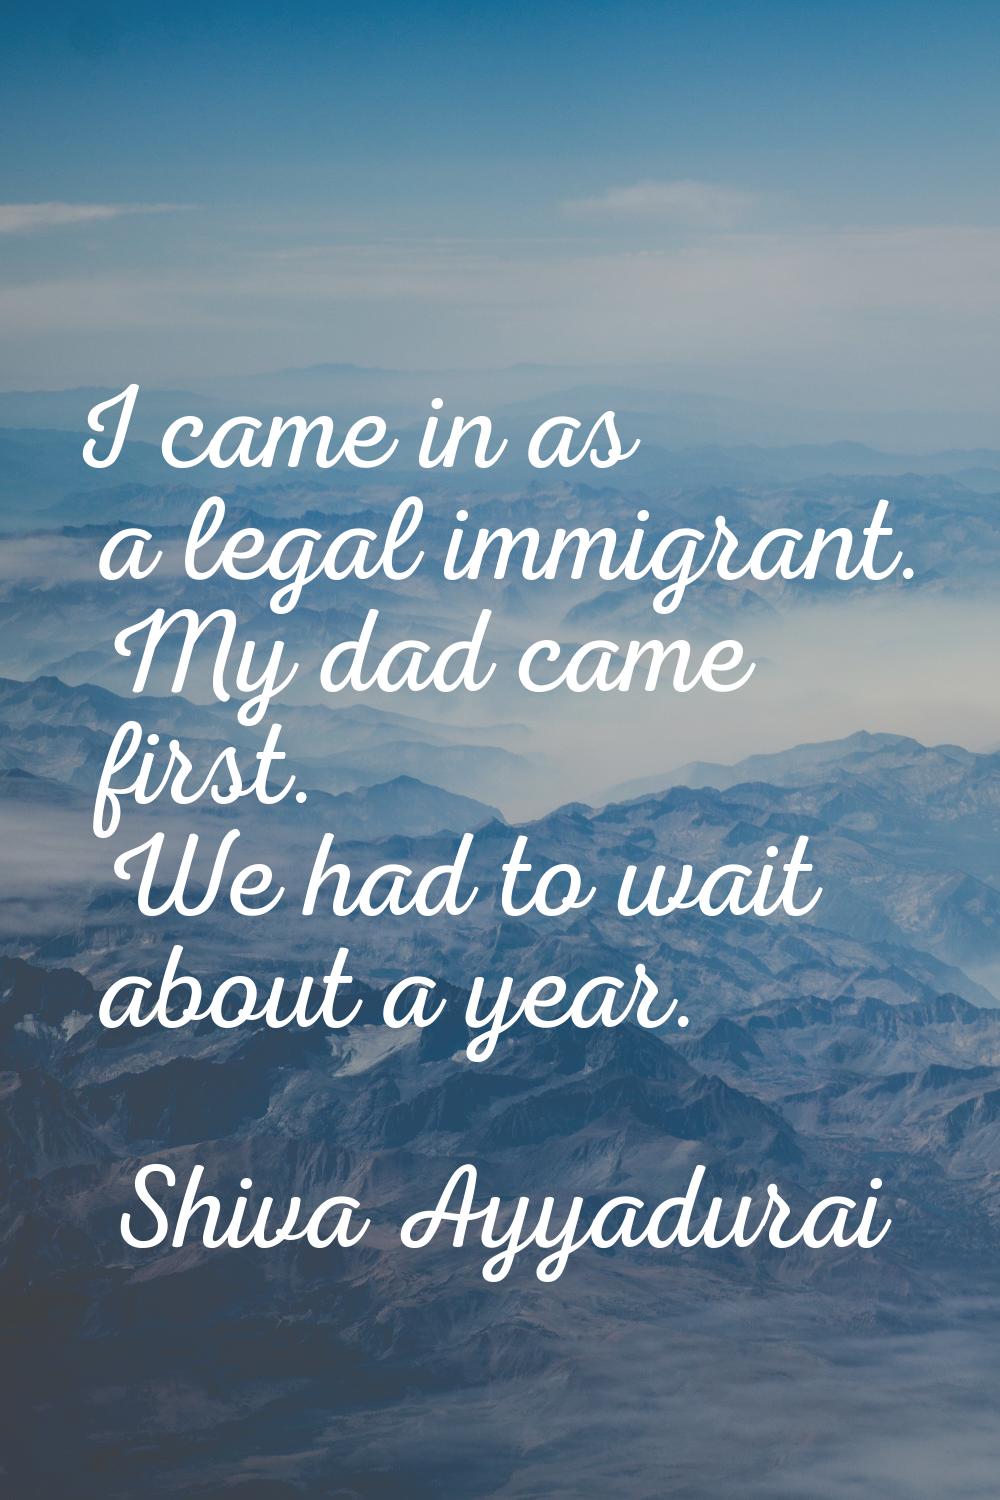 I came in as a legal immigrant. My dad came first. We had to wait about a year.